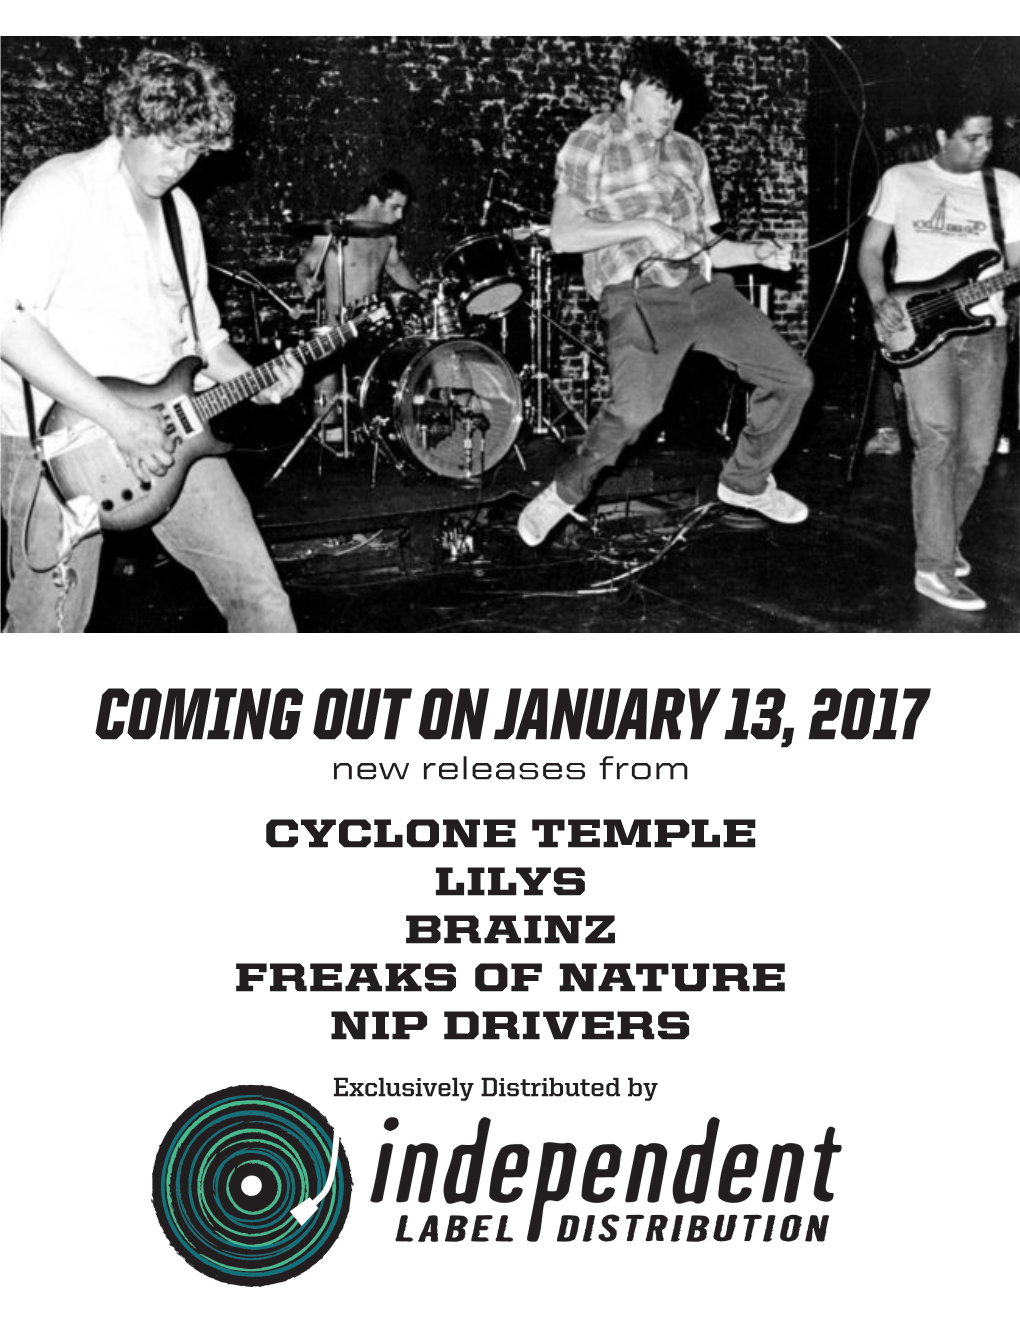 COMING out on JANUARY 13, 2017 New Releases from CYCLONE TEMPLE LILYS BRAINZ FREAKS of NATURE NIP DRIVERS